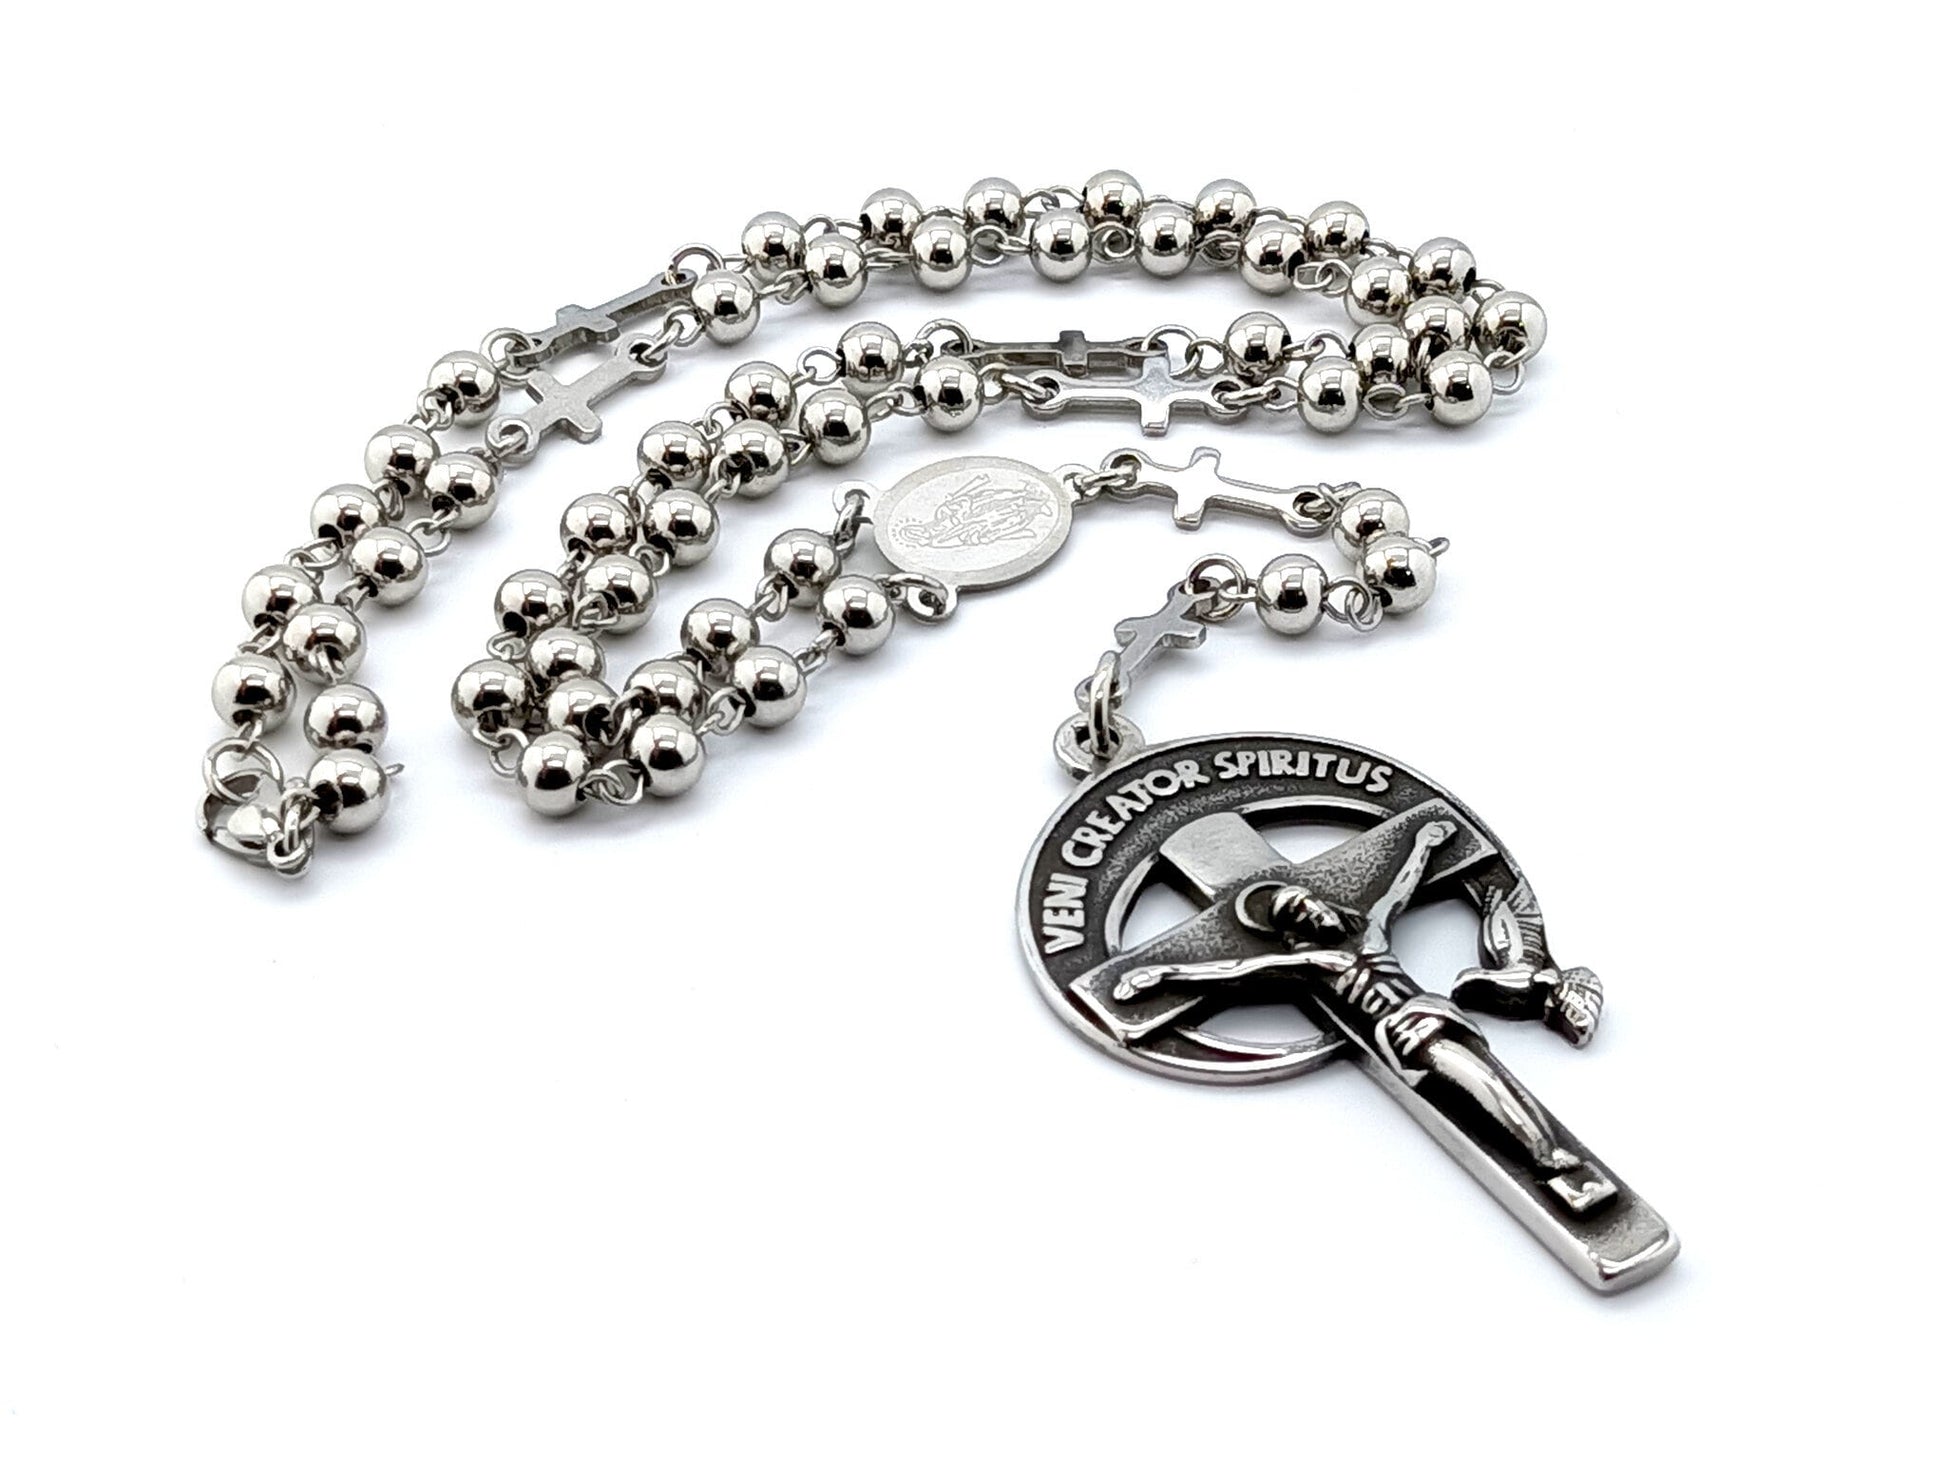 Holy Spirit unique rosary beads with stainless steel beadsand cross linking beads, stainless steel crucifix and miraculous medal centre.